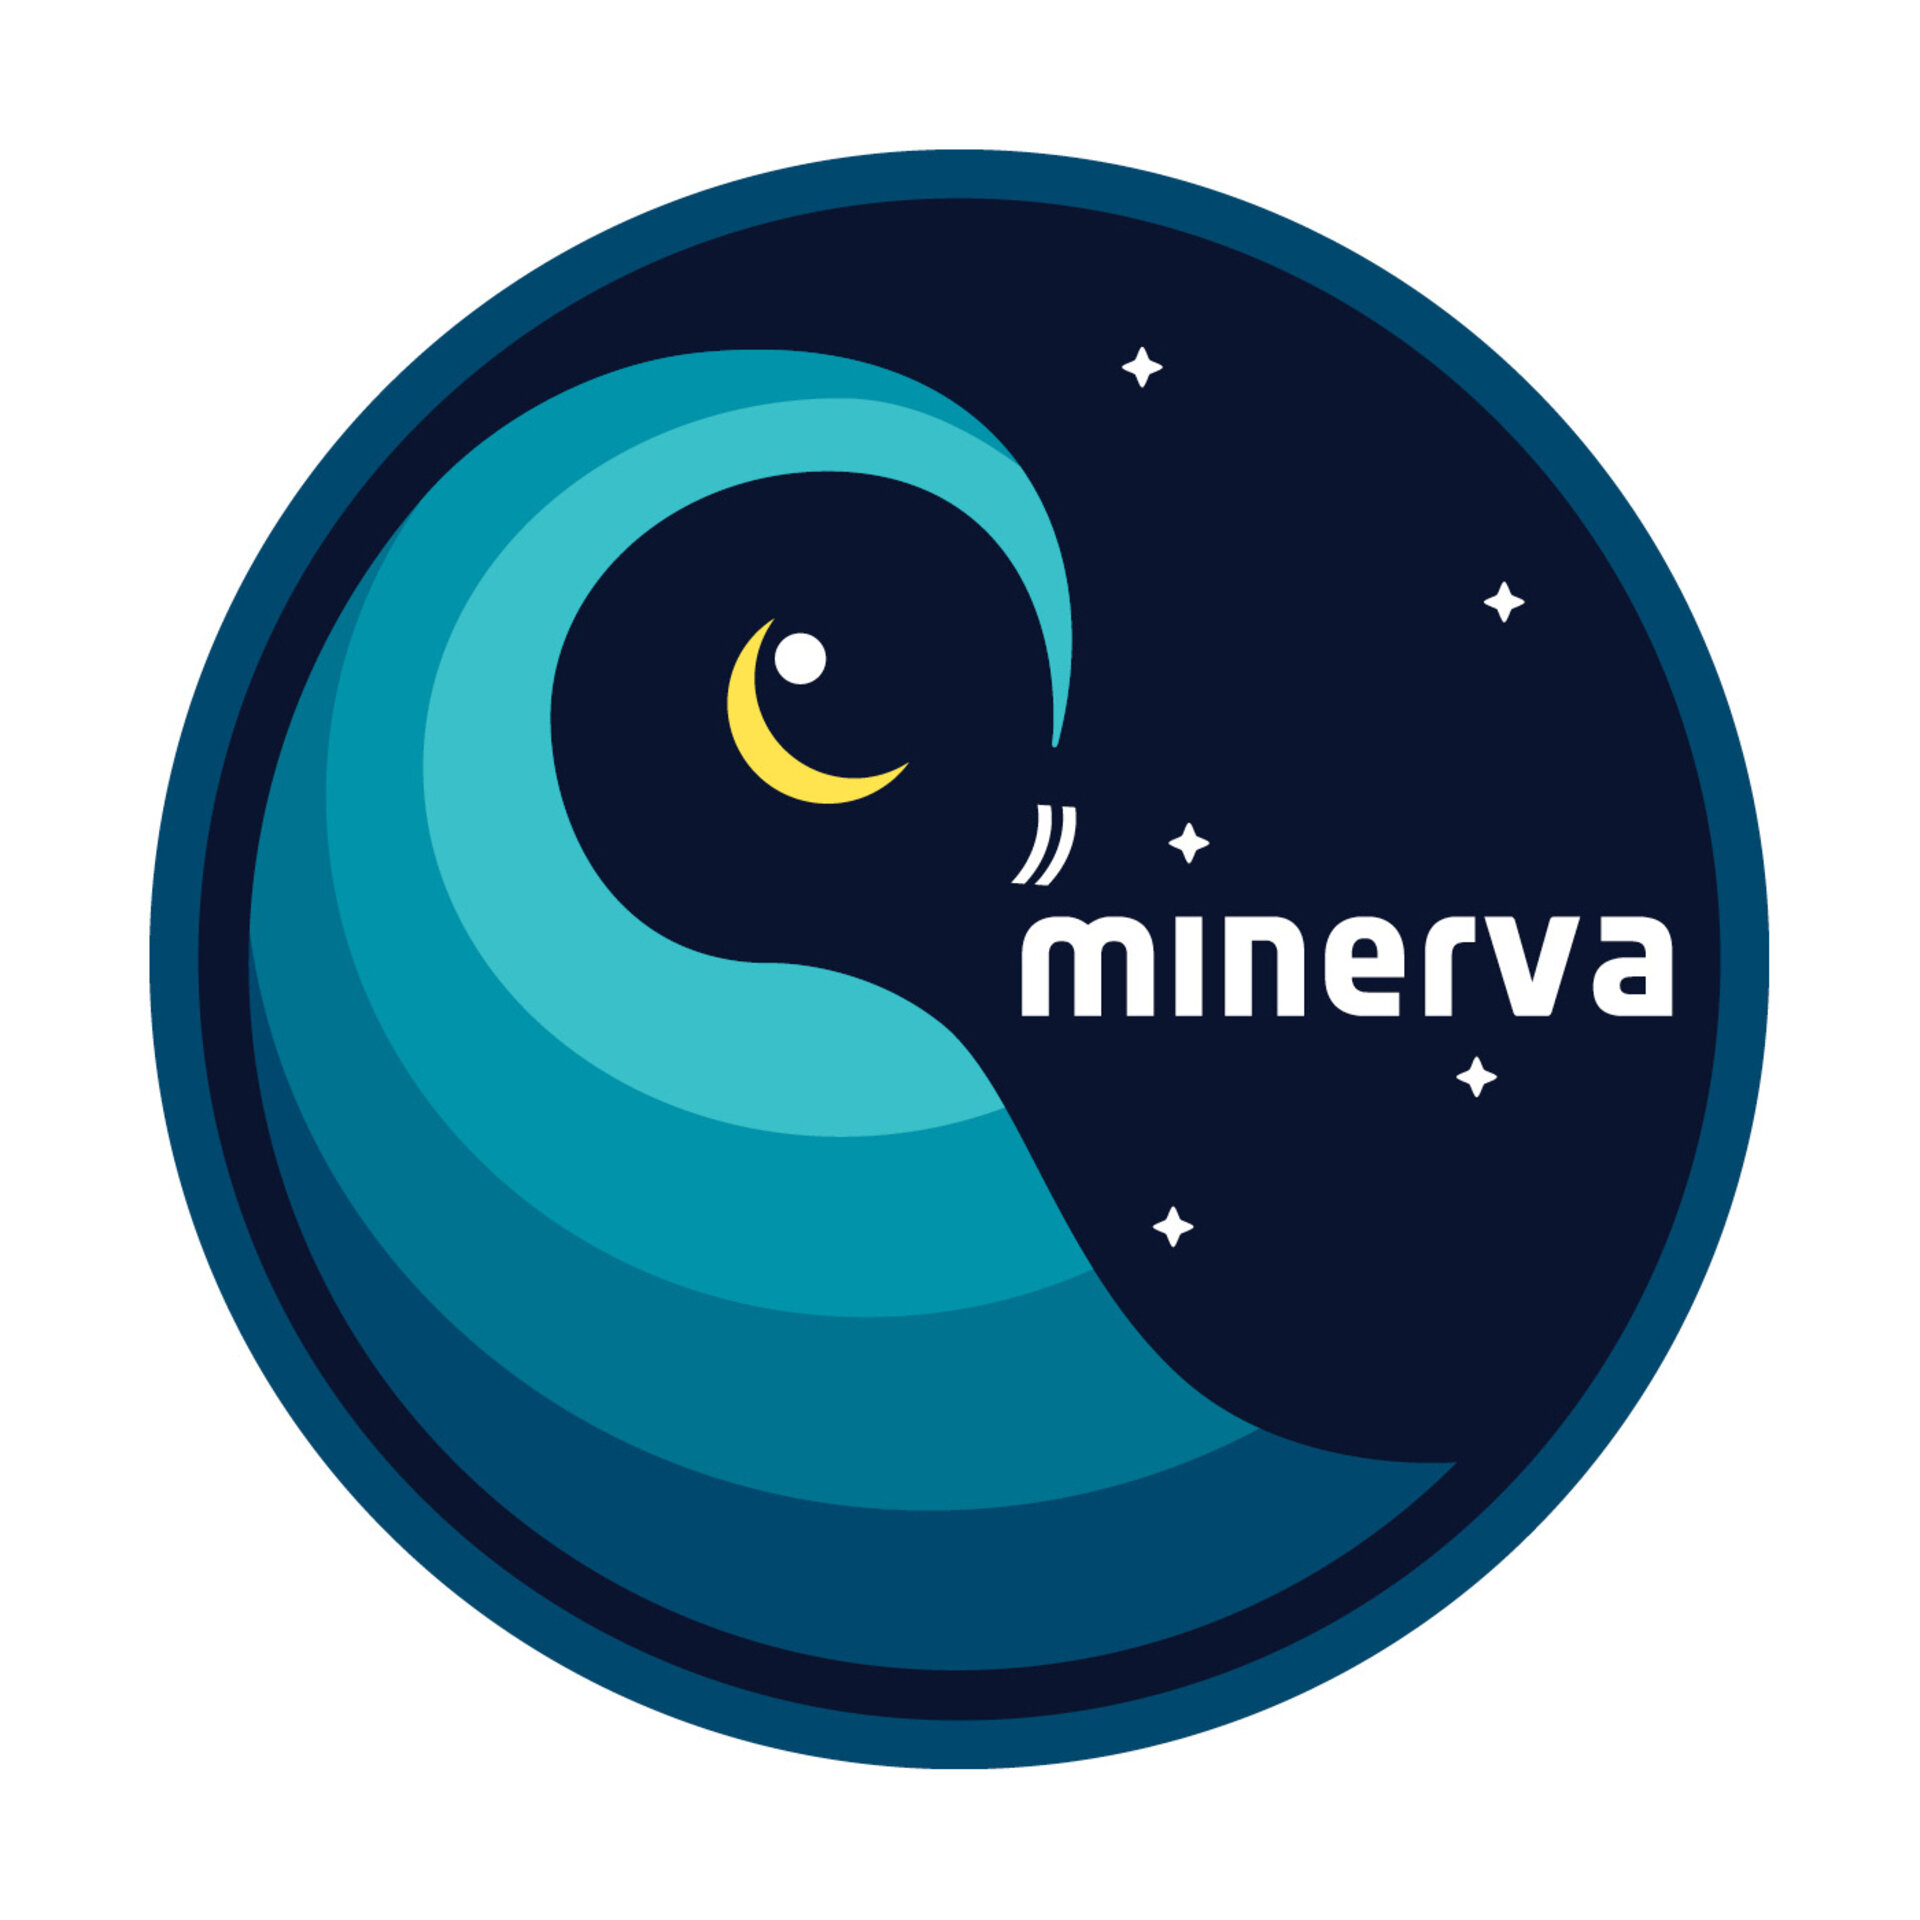 EUROPA - MINERVA Home Page - European Commission - Publications